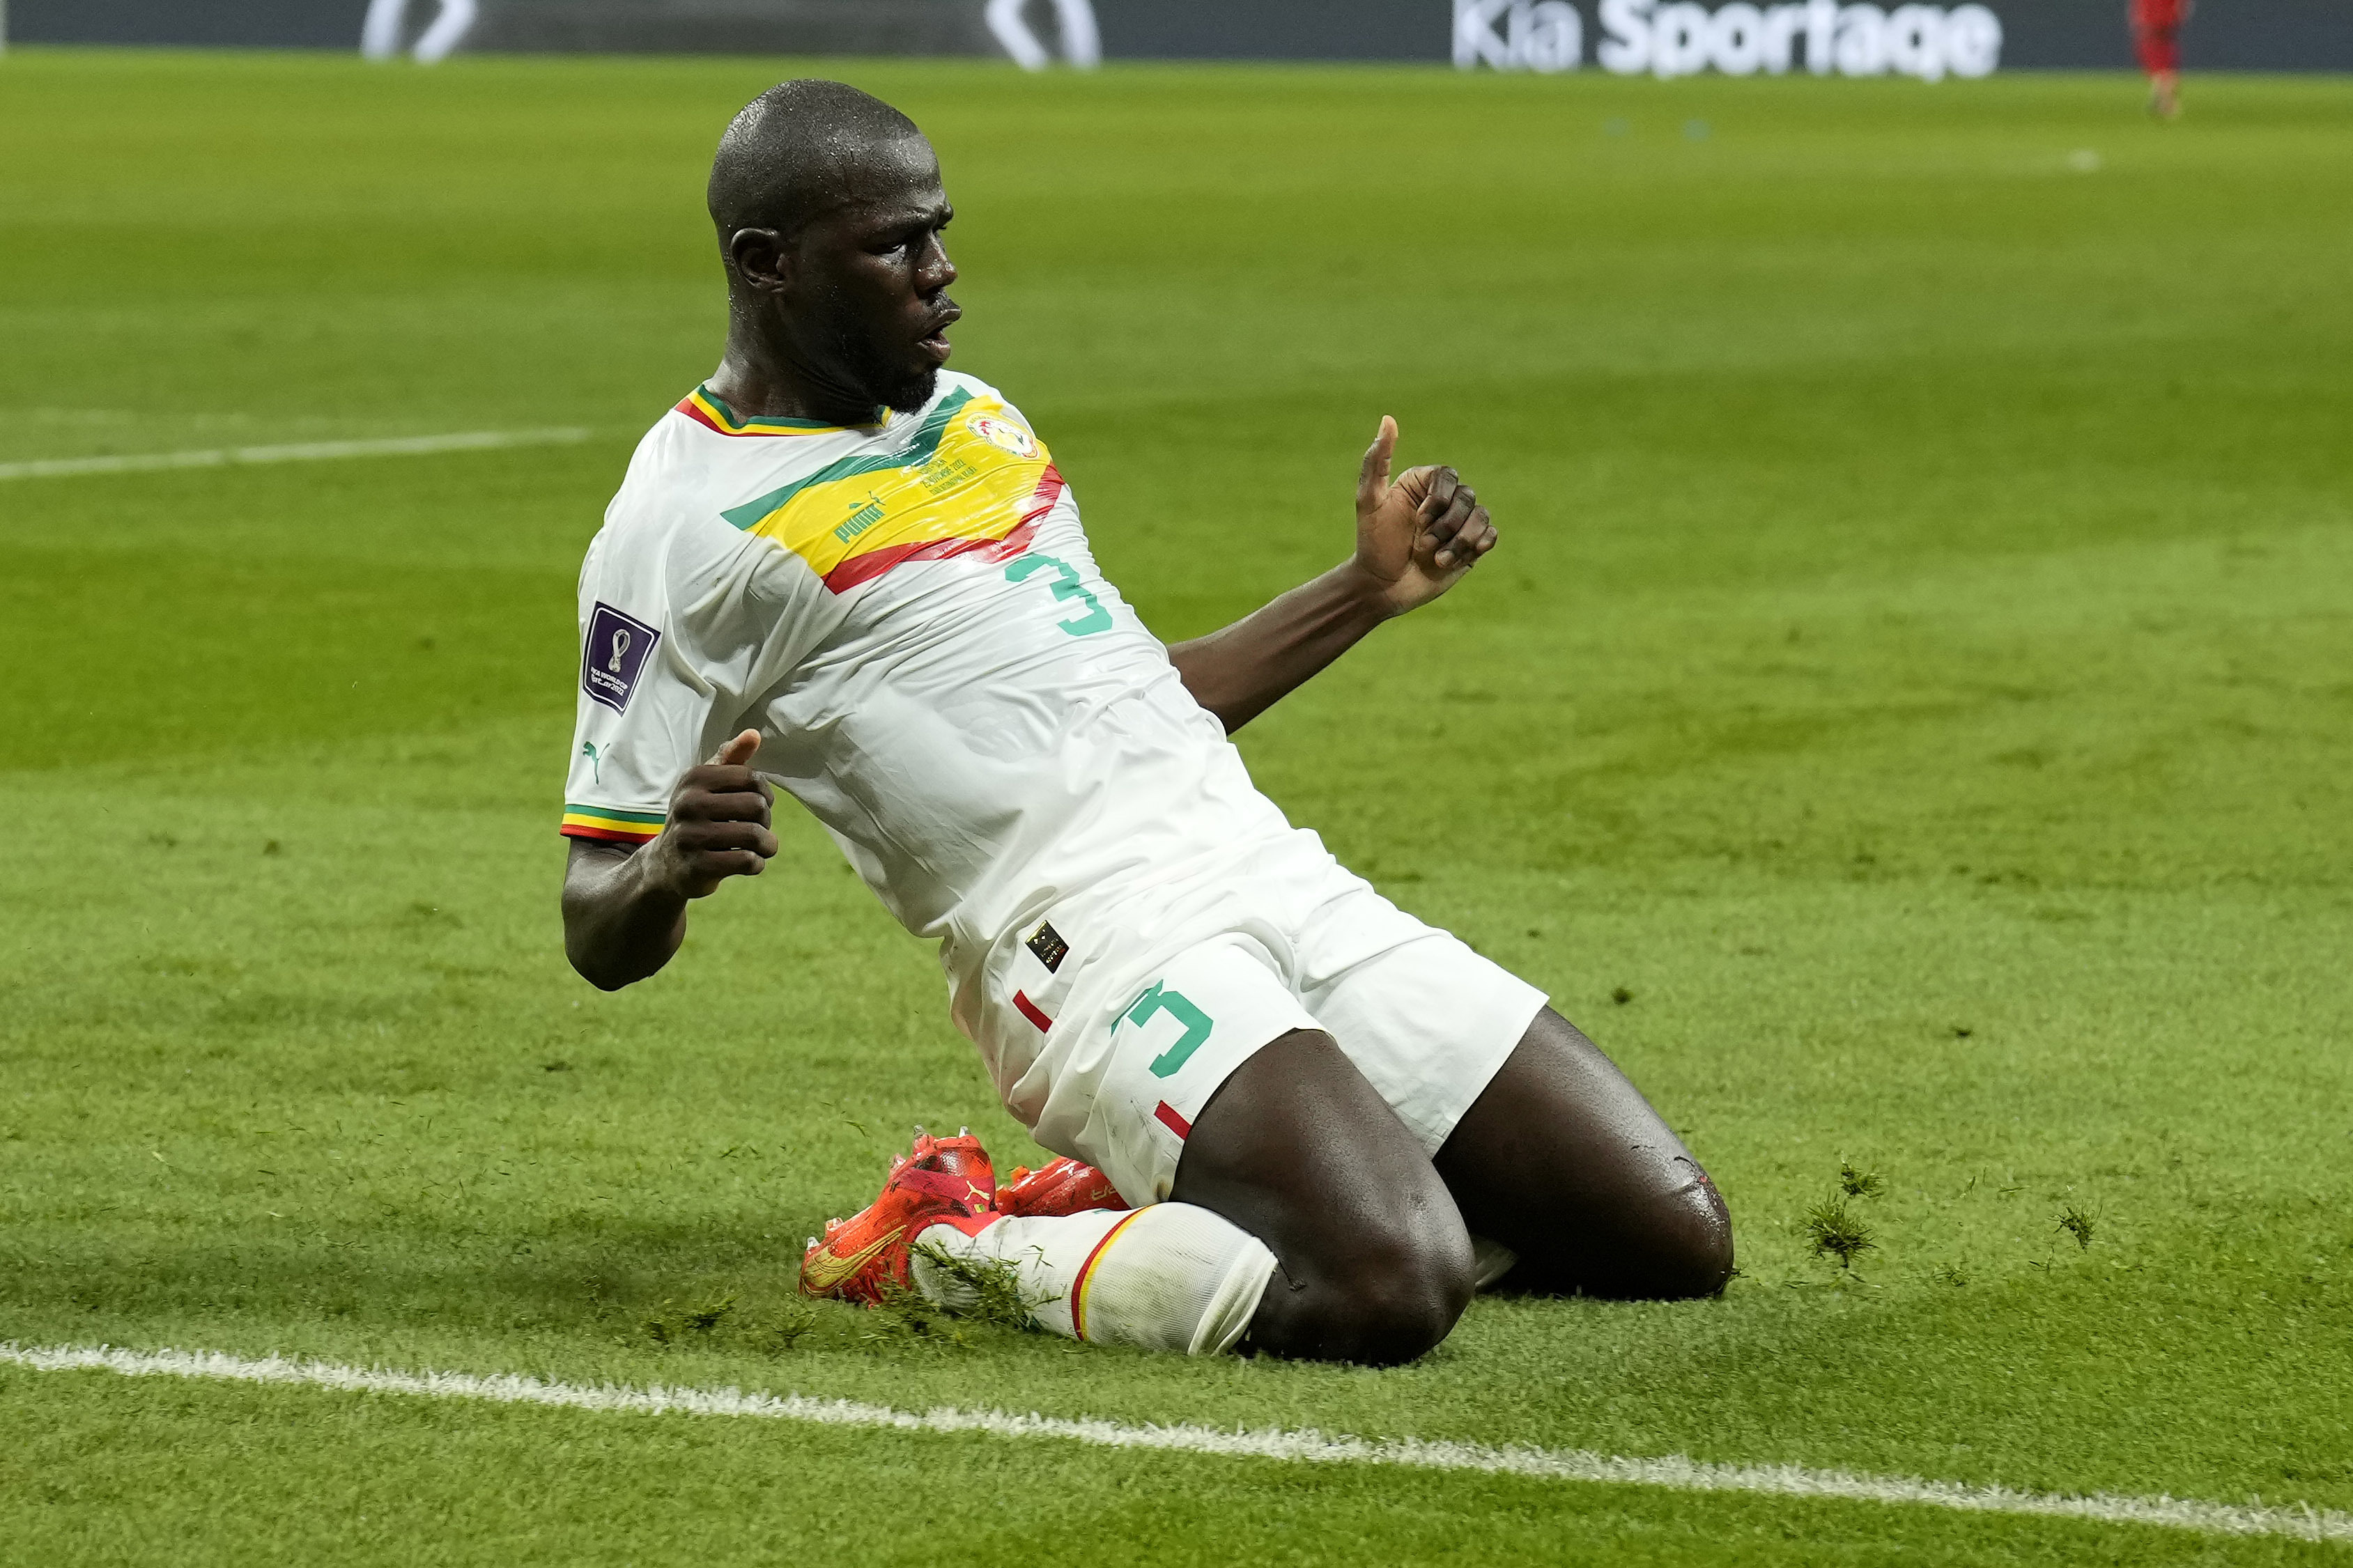 Senegal edges past Ecuador to advance to knockout stage at World Cup